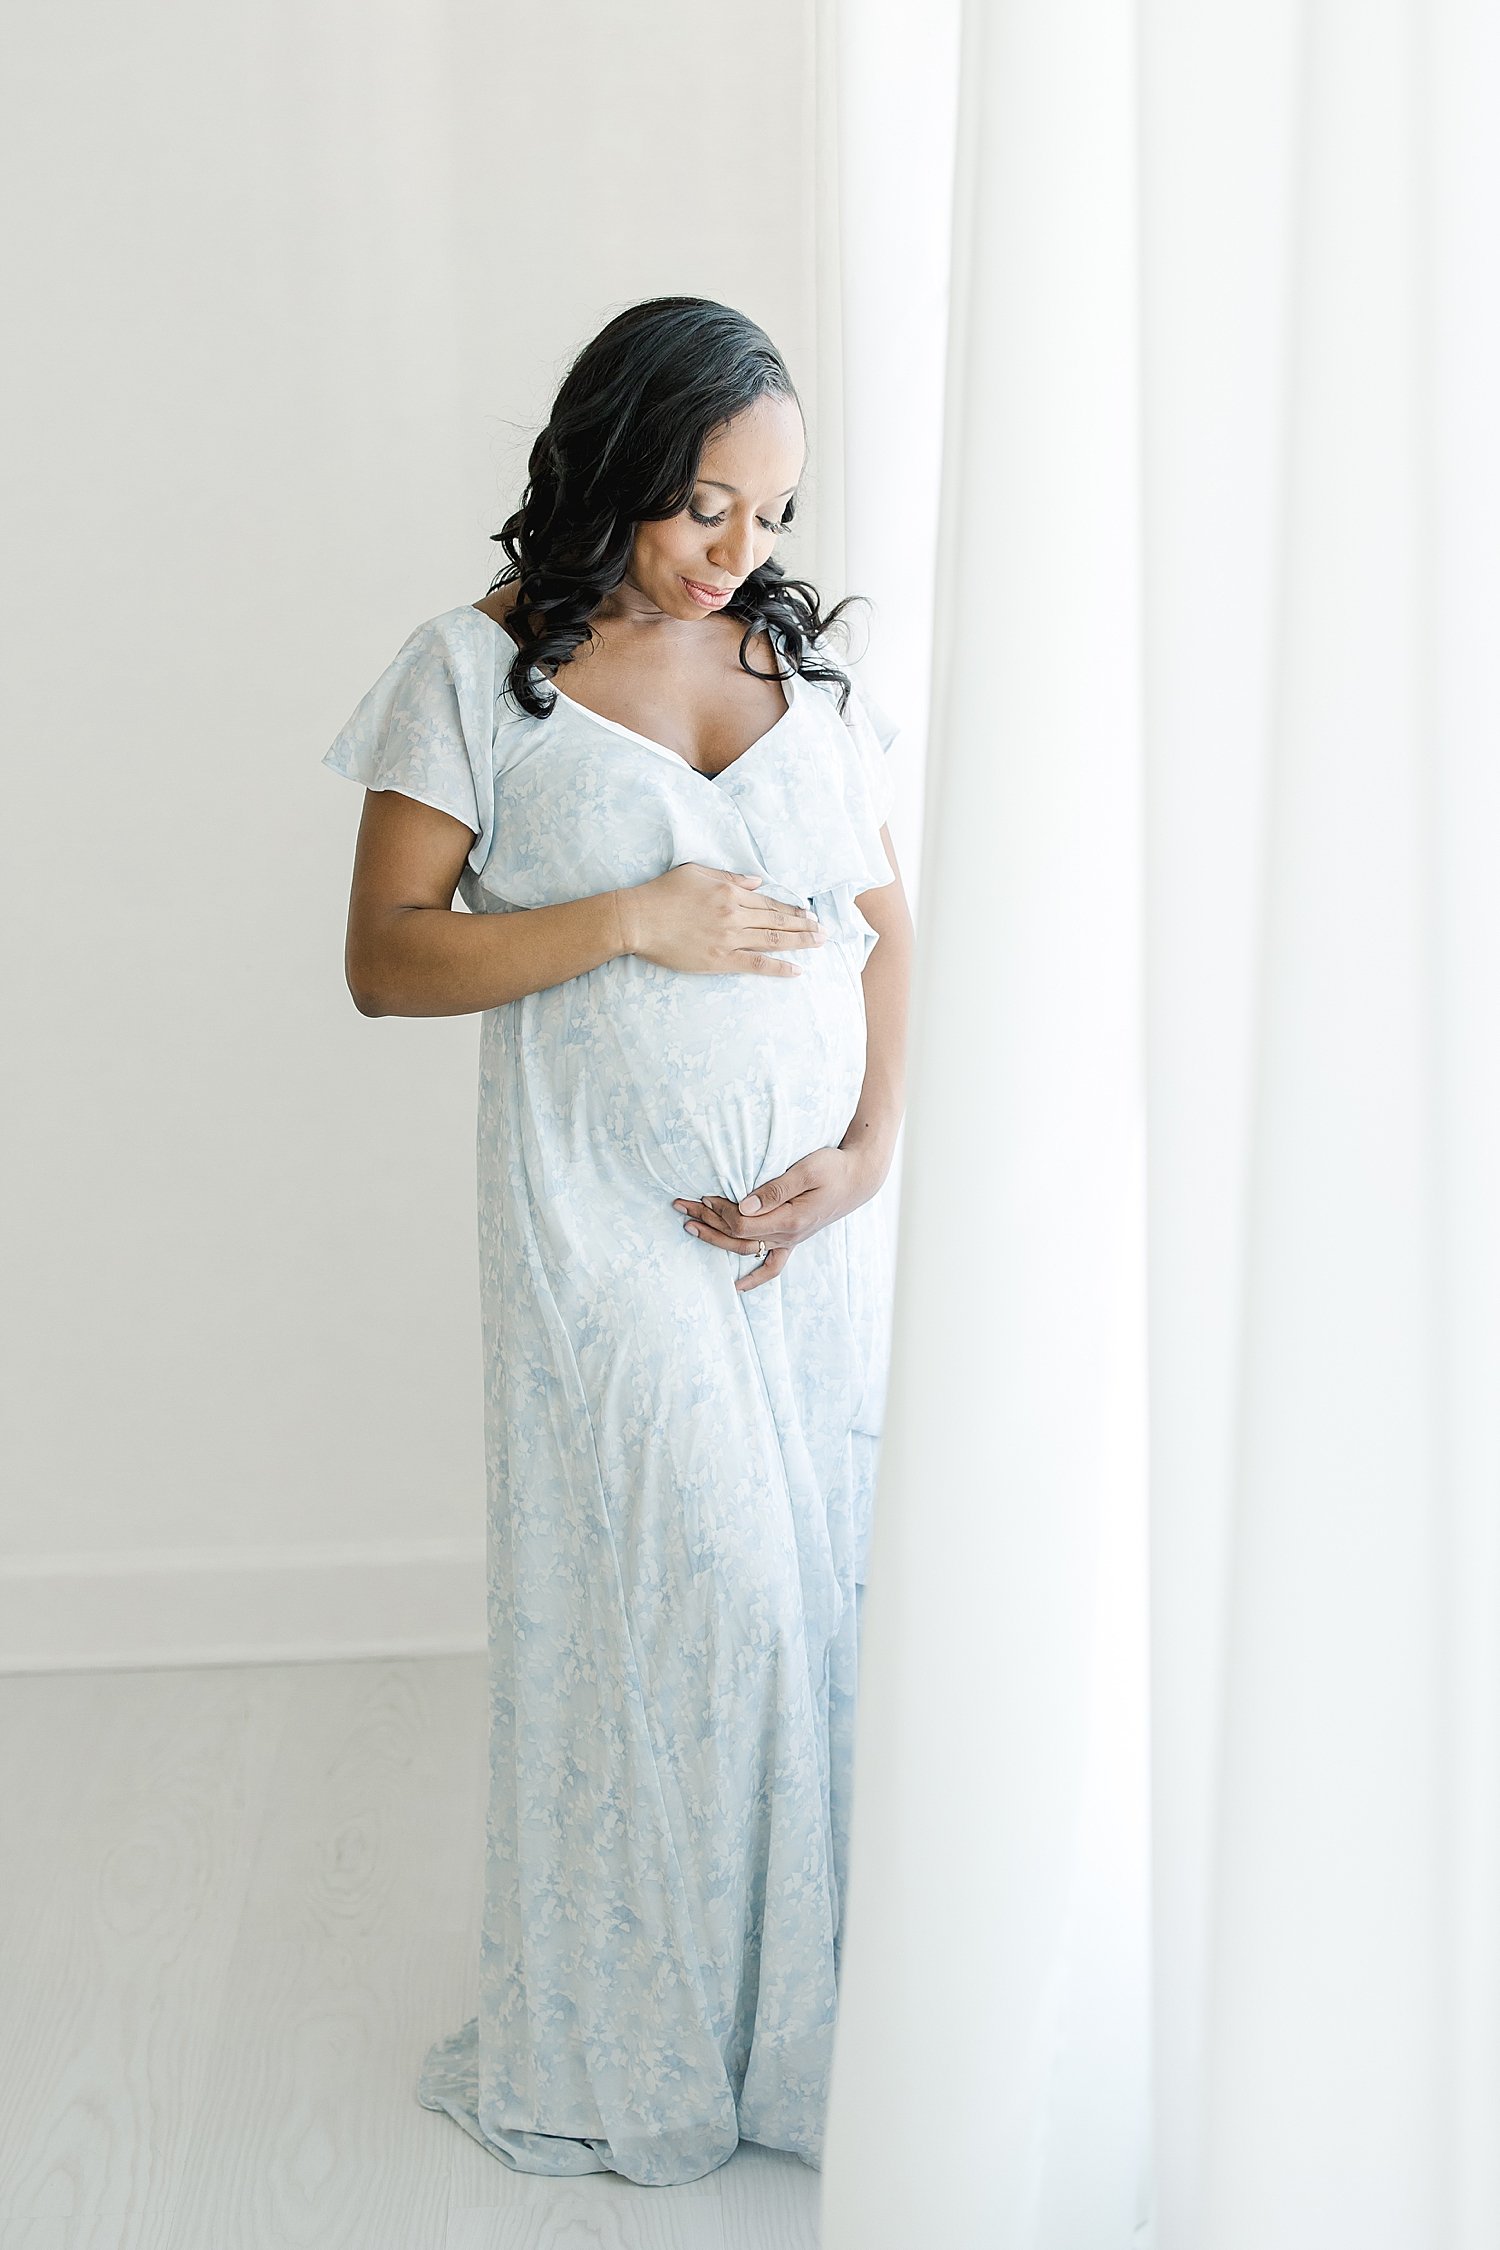 four-looks-for-studio-maternity-session-fairfield-county-ct_0003.jpg